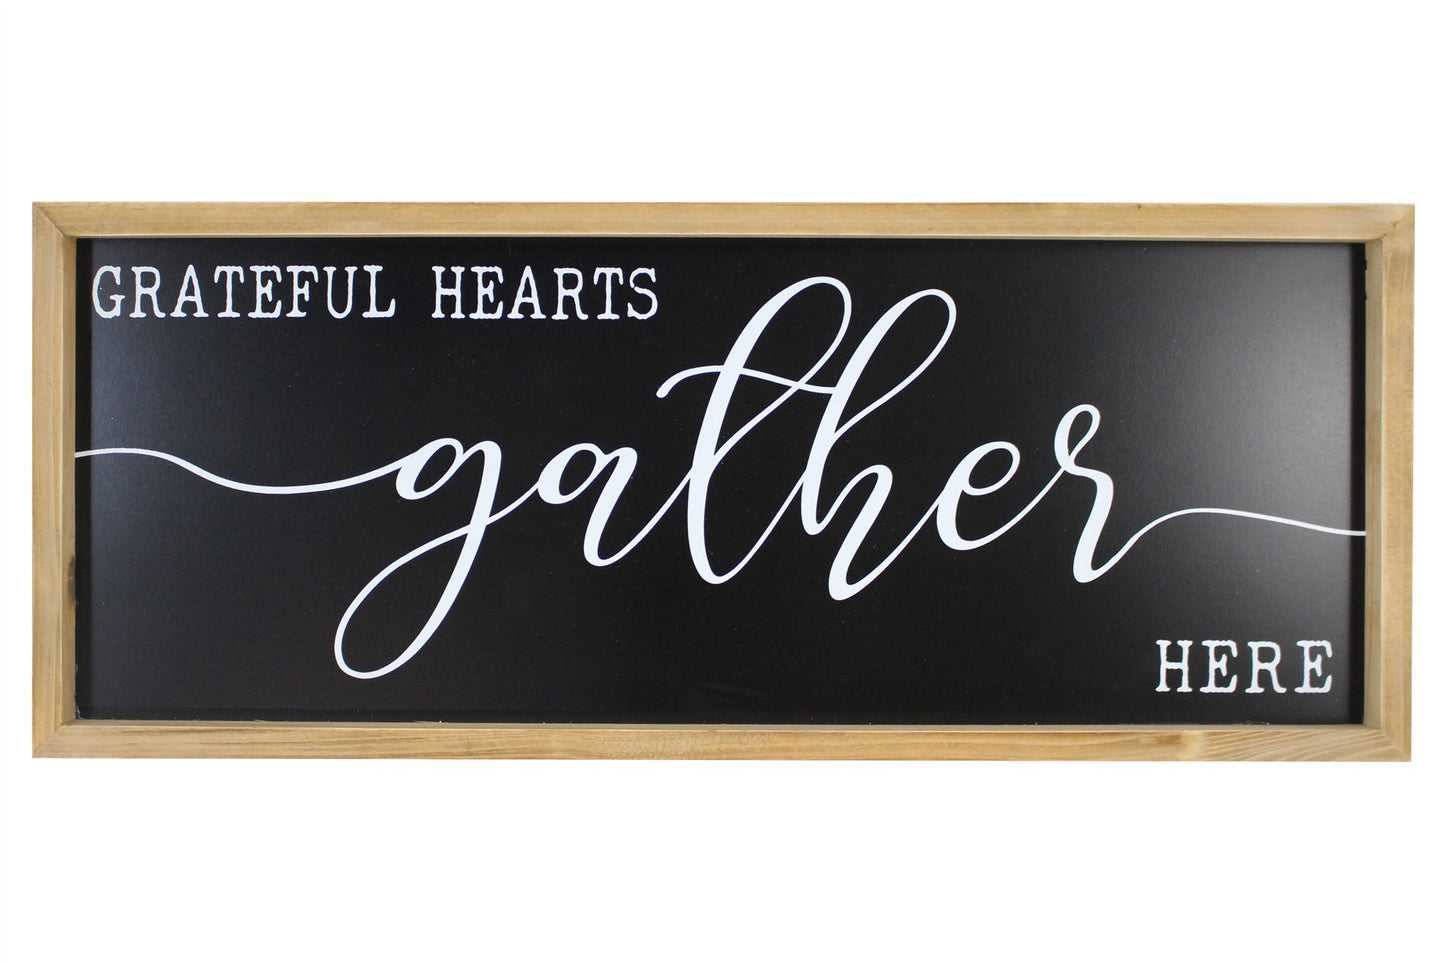 Grateful Hearts Gather Here Wall Sign